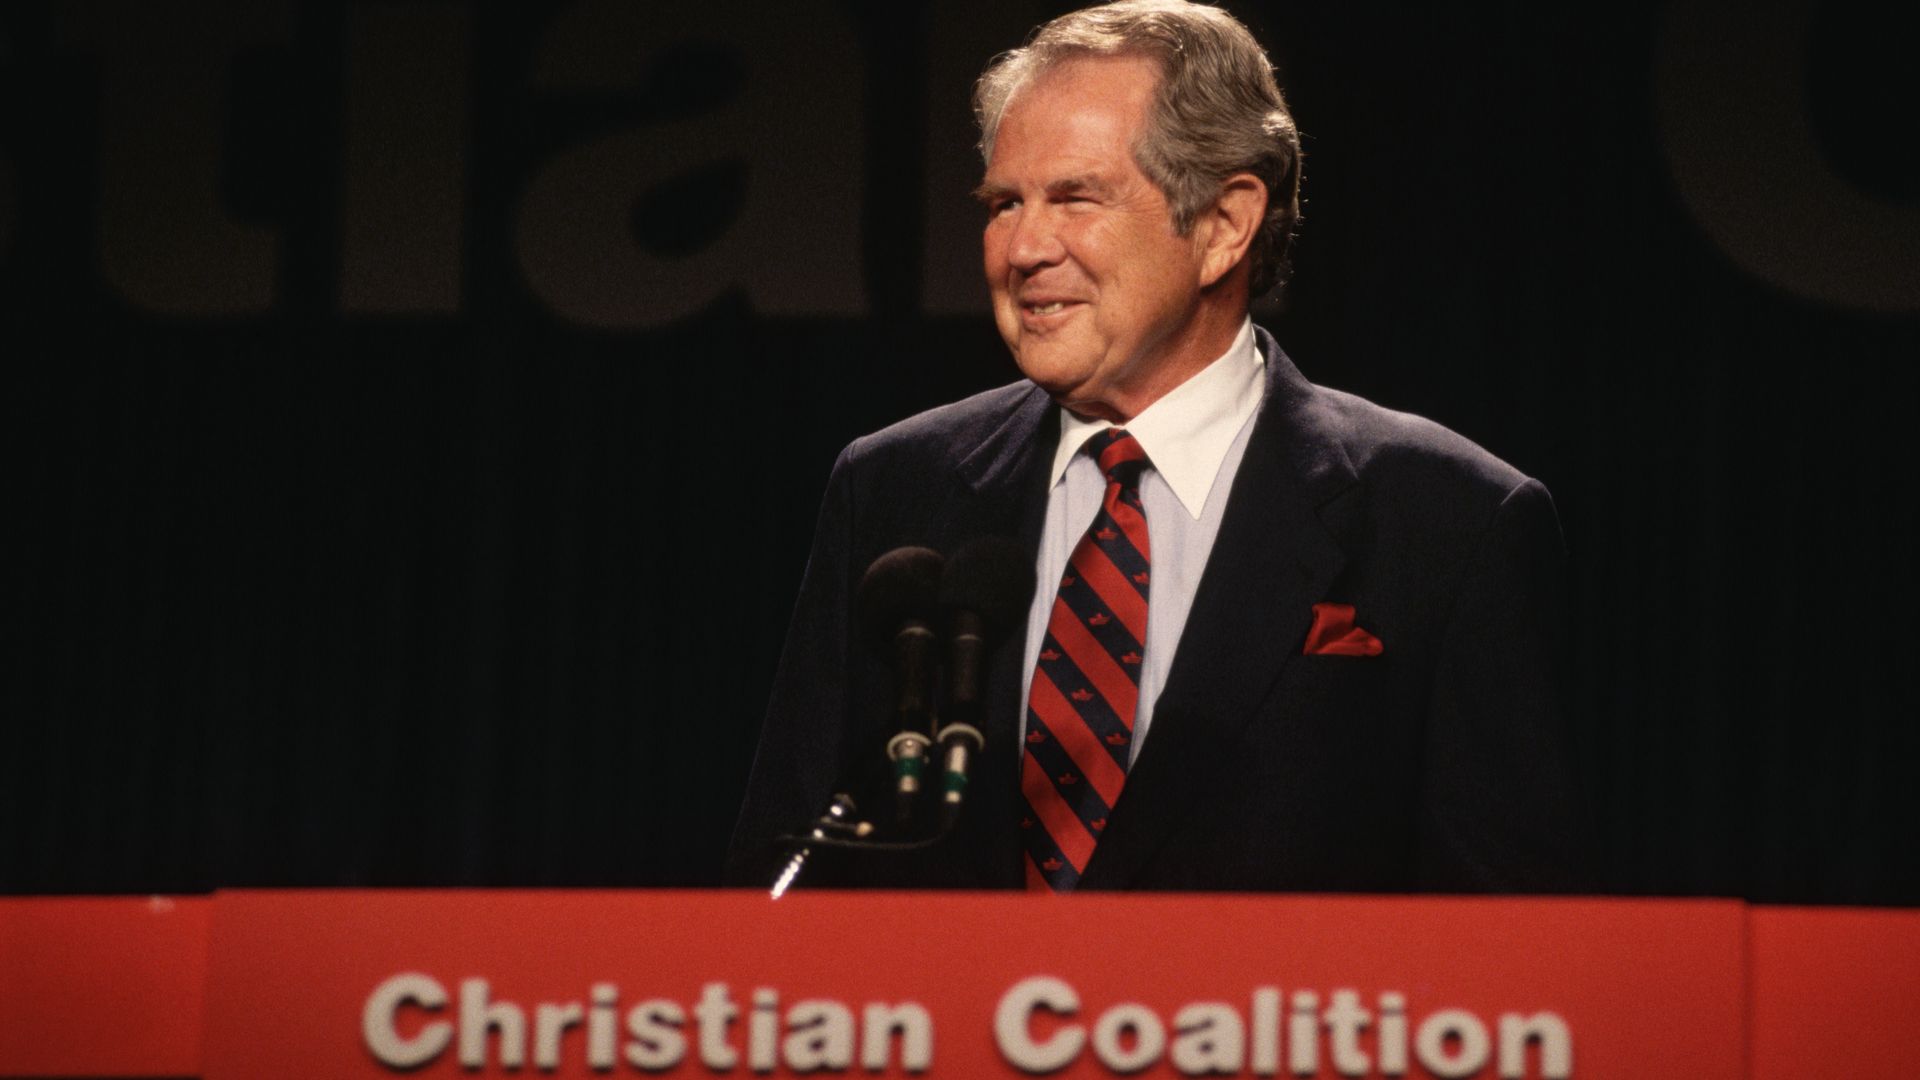 An old photograph of Pat Robertson speaking at a podium with a sign that says "Christian Coalition" underneath it